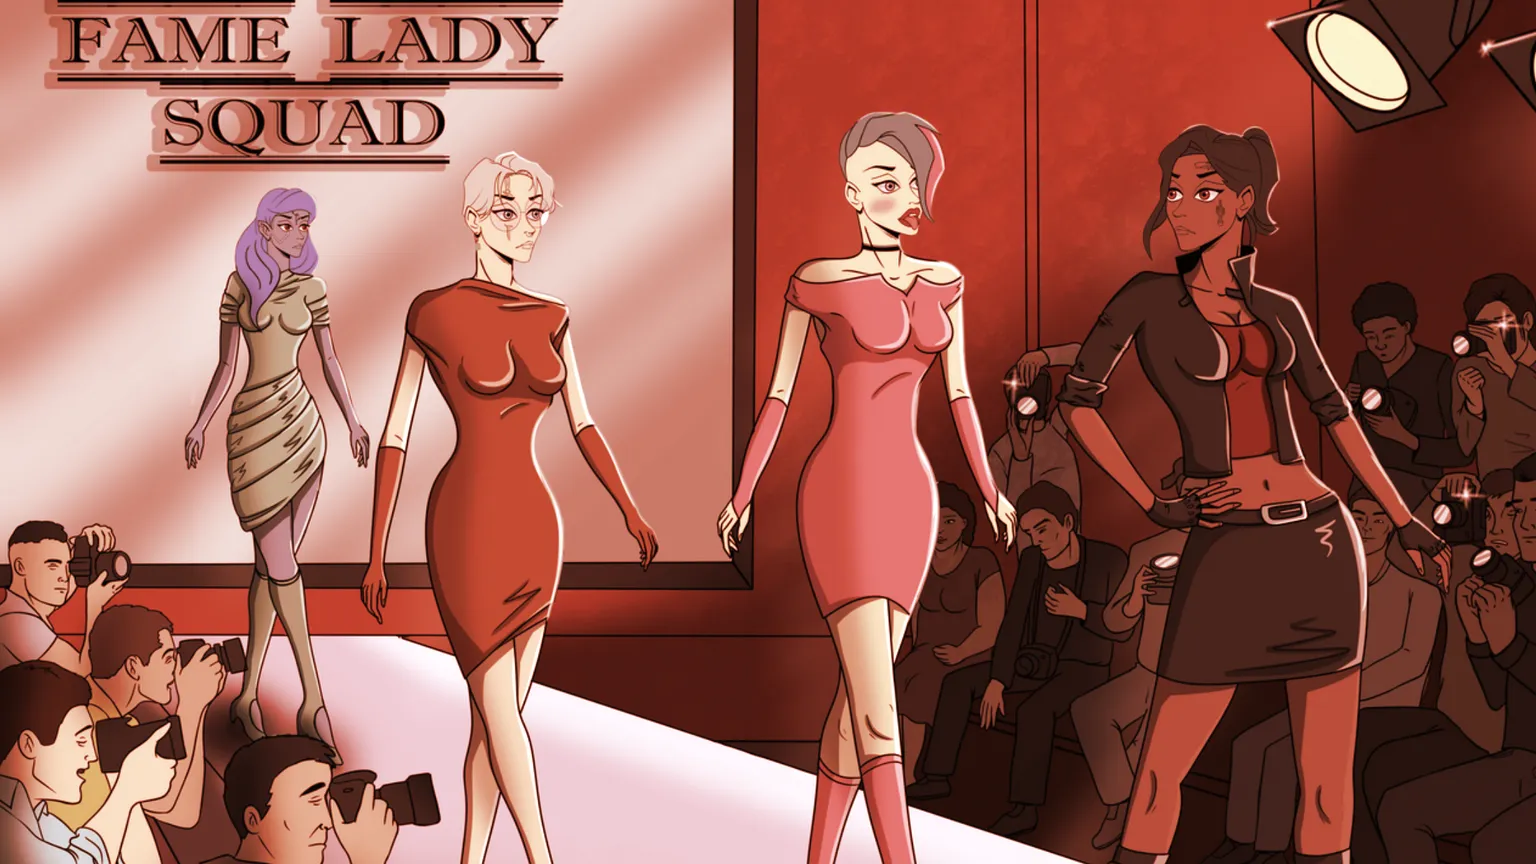 Fame Lady Squad wasn't founded by Ladies after all. Image: Fame Lady Squad